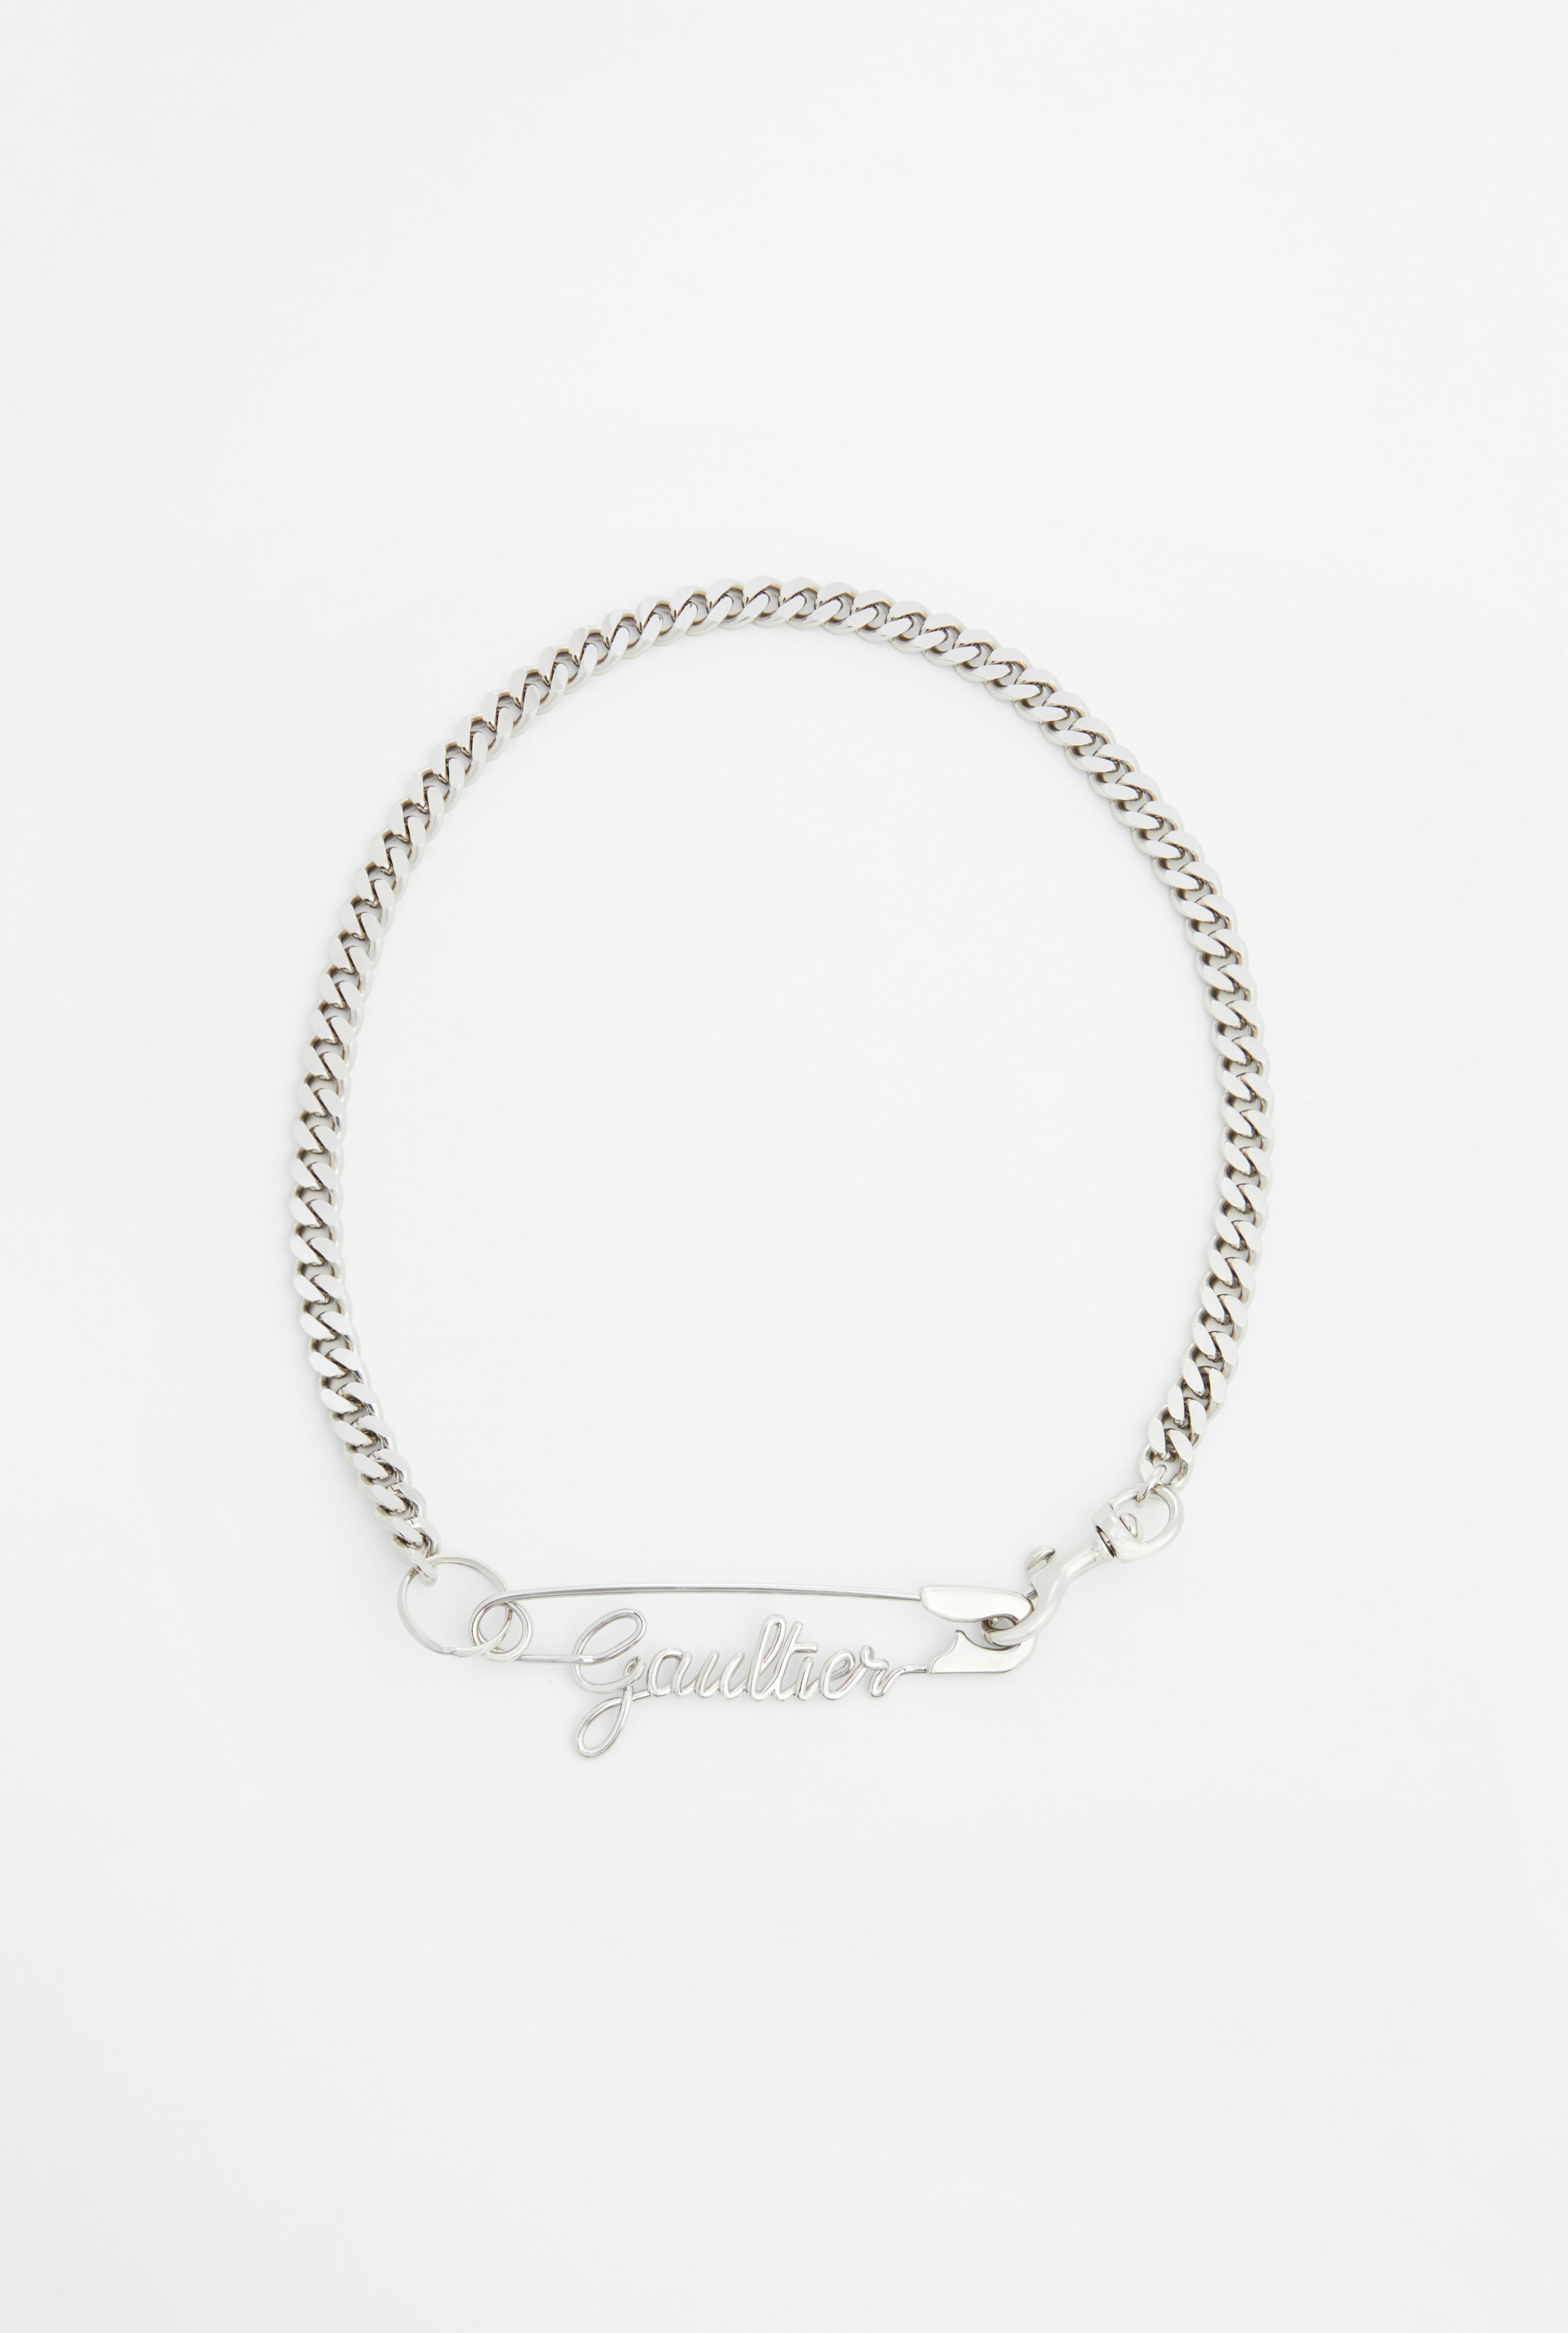 The Gaultier Safety Pin necklace 